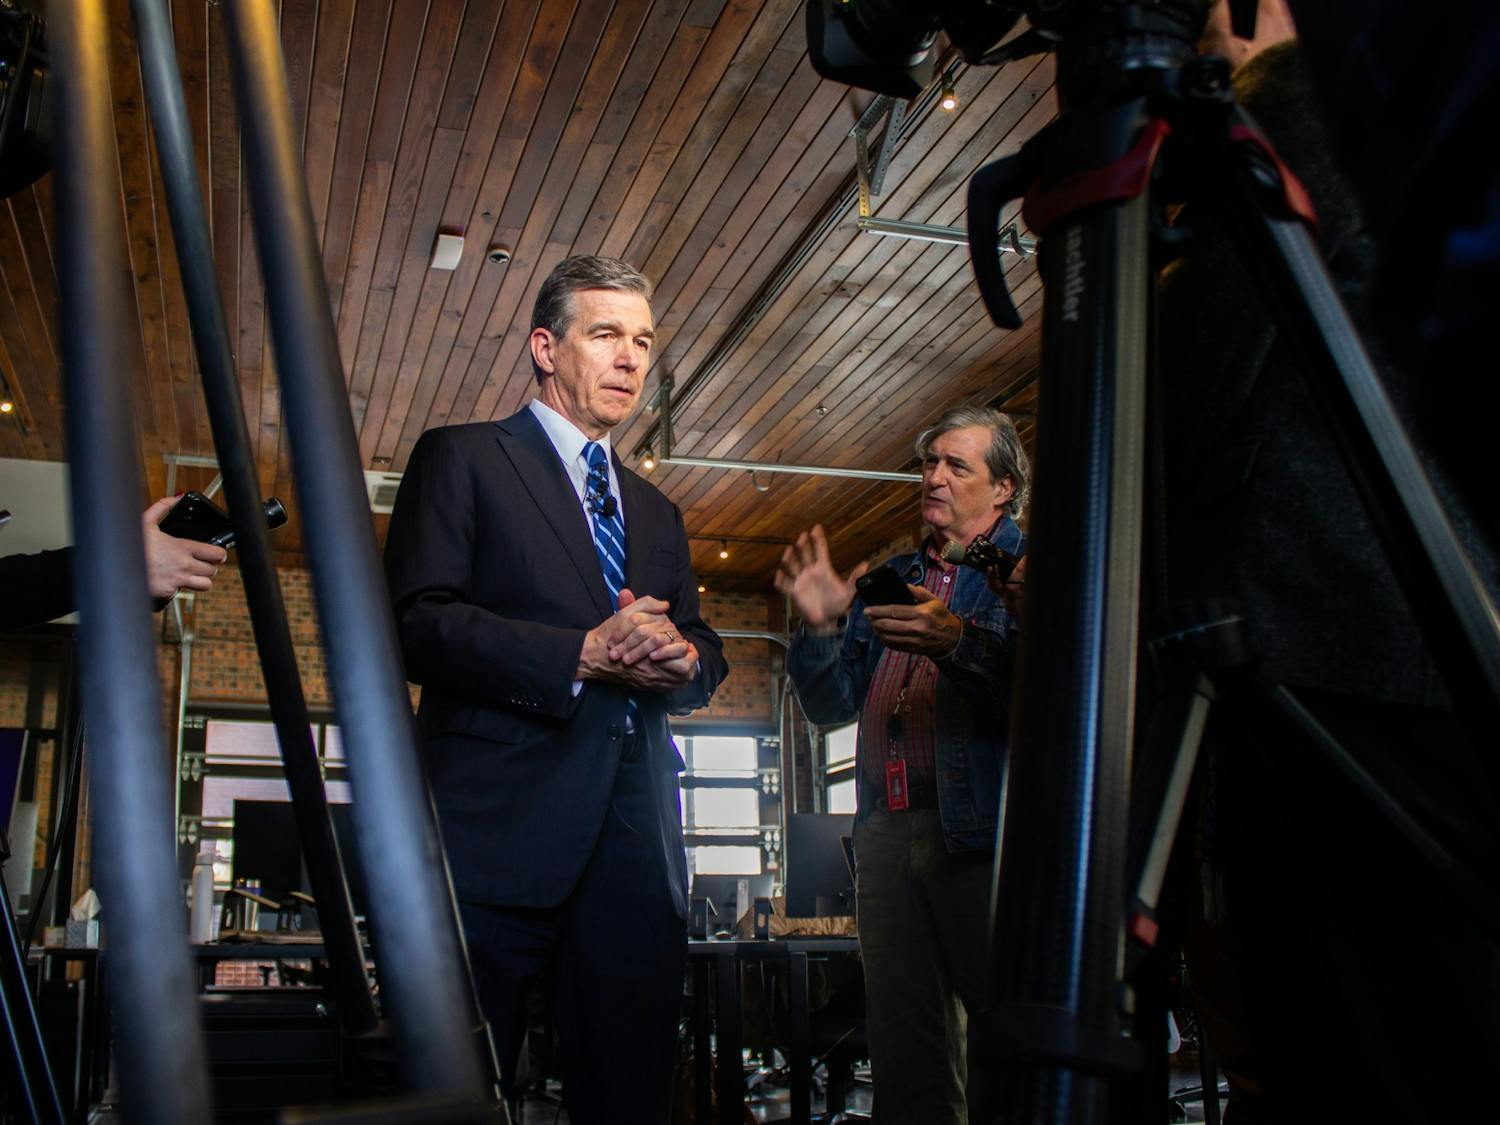 Gov. Roy Cooper visited Chapel Hill on Tuesday, Nov. 19, 2019  to announce that Well Dot Inc., a health technology company, will base its new operations center in the town and create 400 jobs.